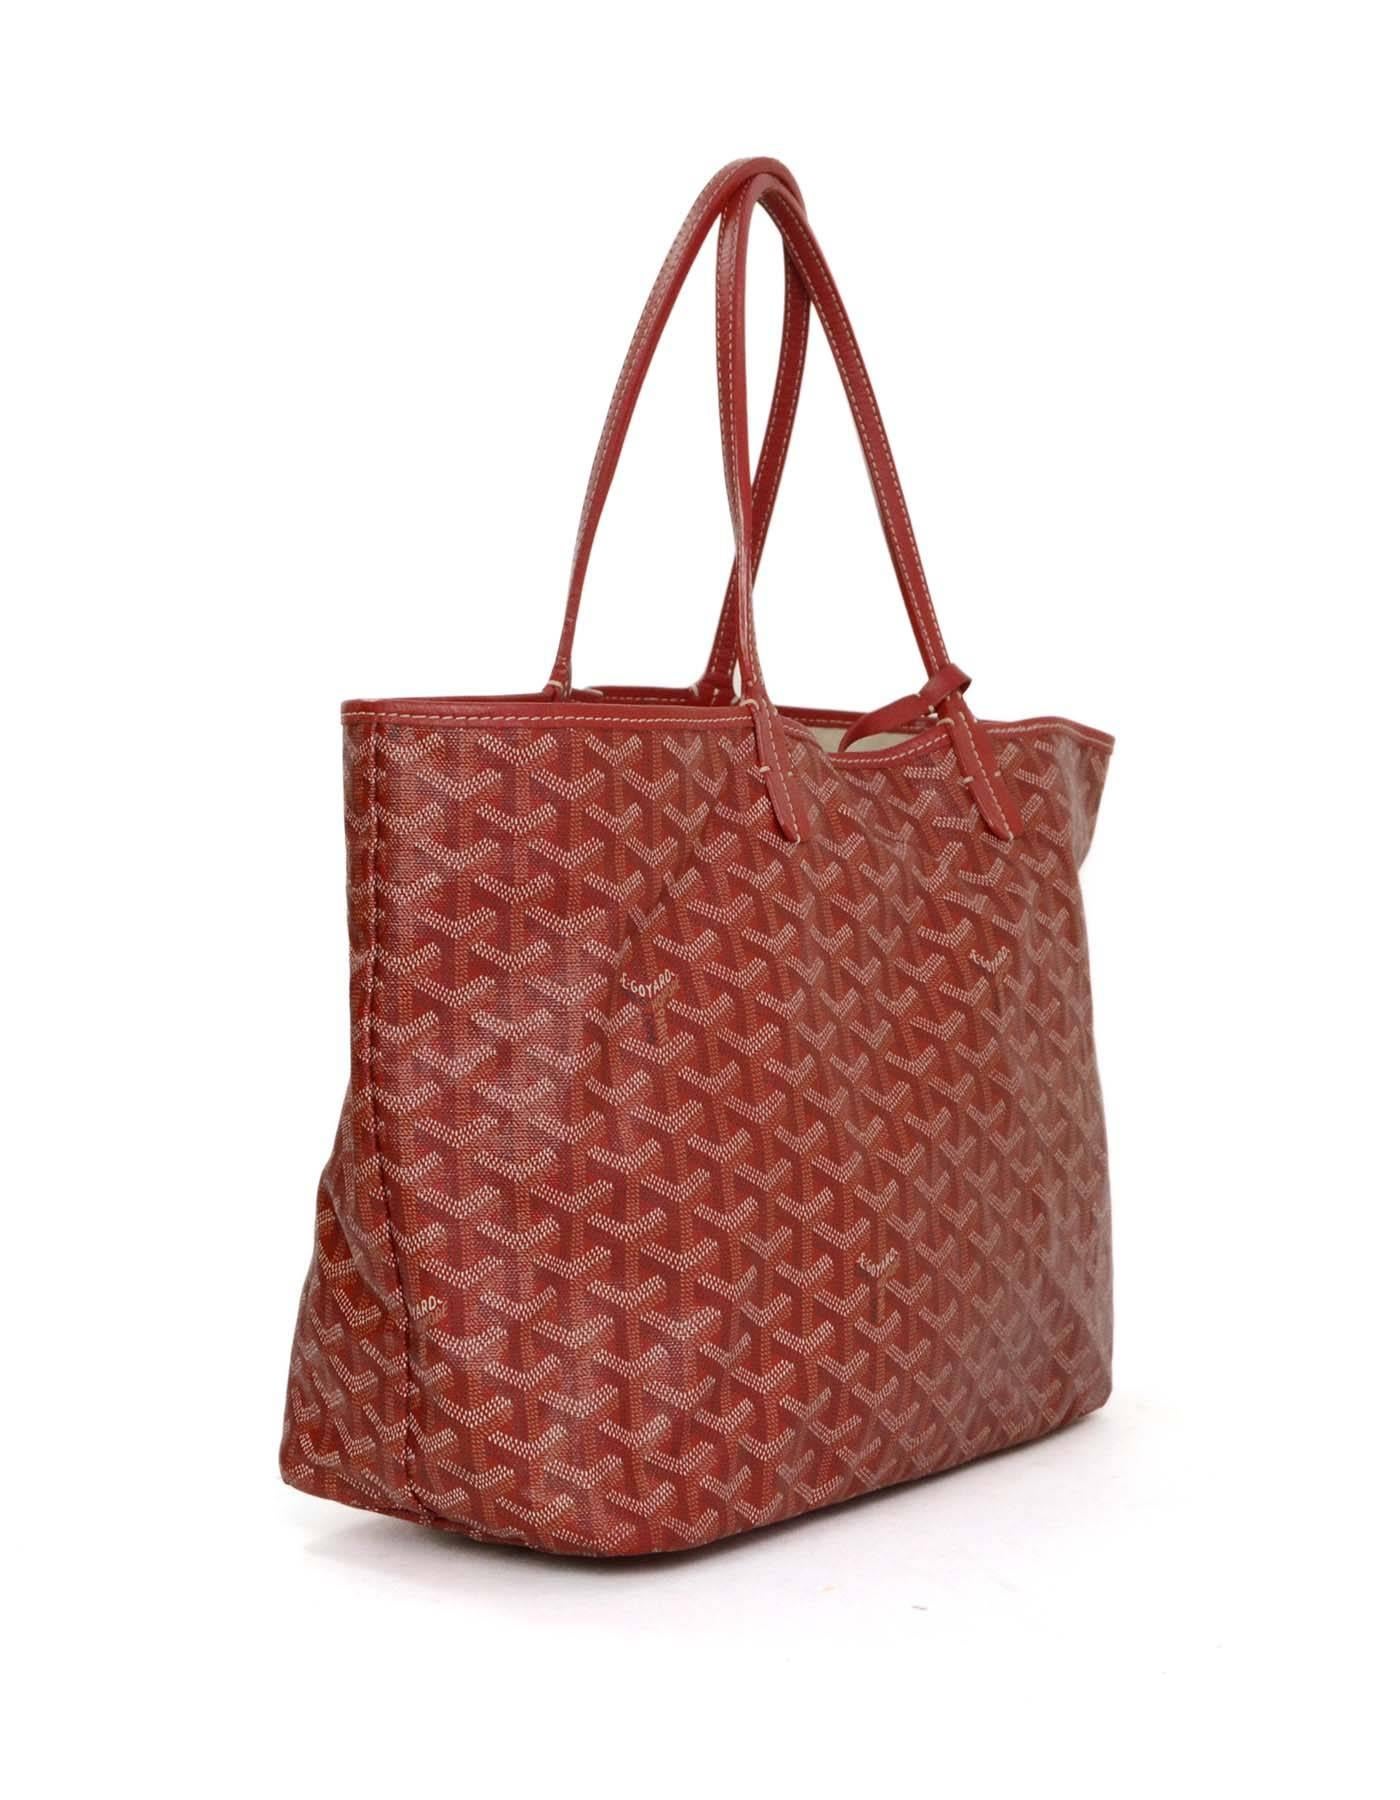 Goyard Red St. Louis MM Tote 
Made In: France
Color: Red and ivory
Hardware: Silvertone
Materials: Coated Canvas
Lining: Beige canvas
Closure/Opening: Open top
Exterior Pockets: None
Interior Pockets: One detachable insert pouch with flap